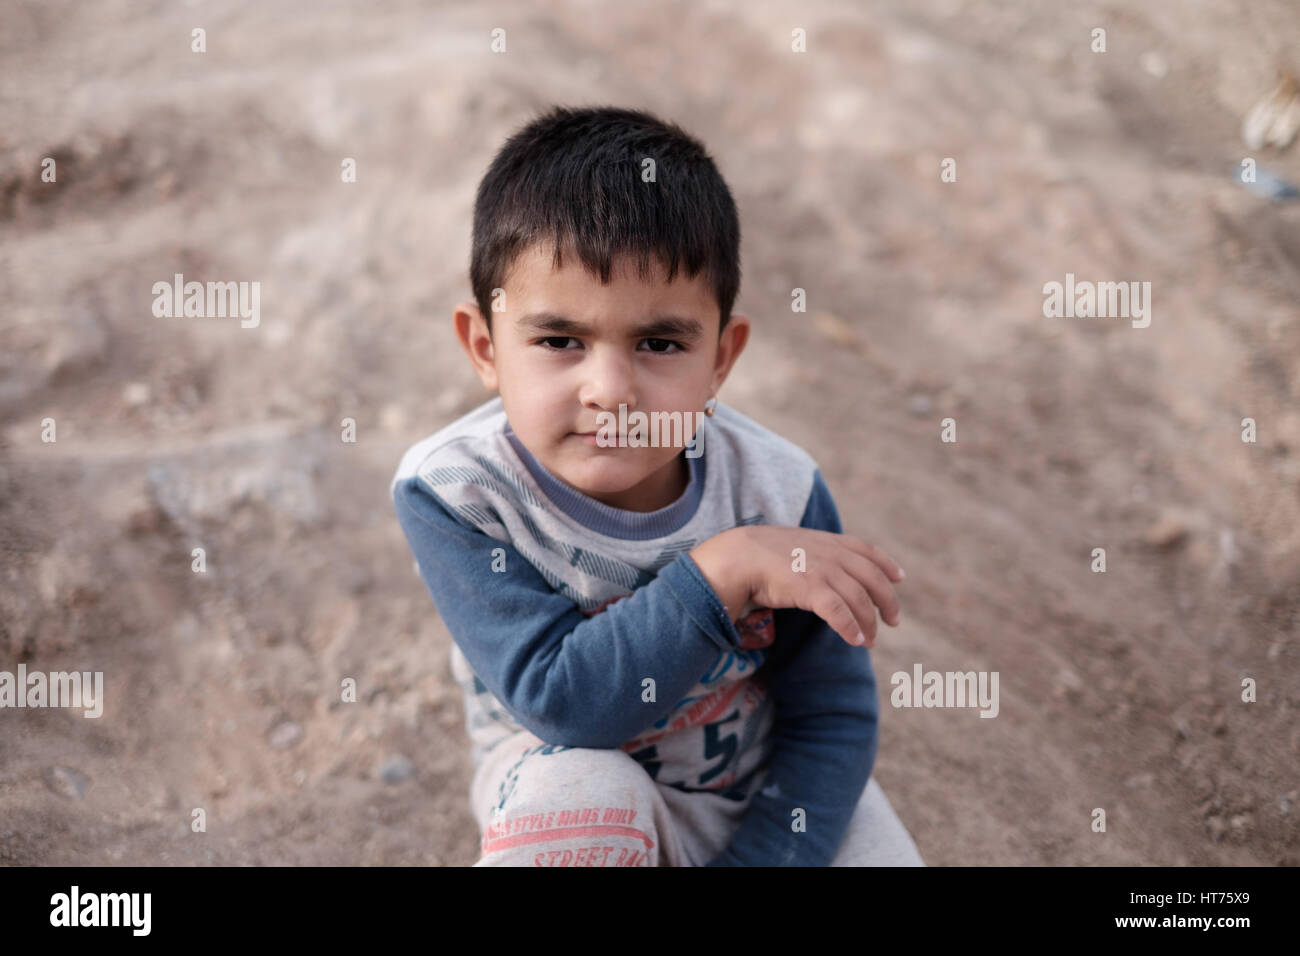 children at refugee refugees camp in northern Iraq having fled fighting in Mosul. Stock Photo